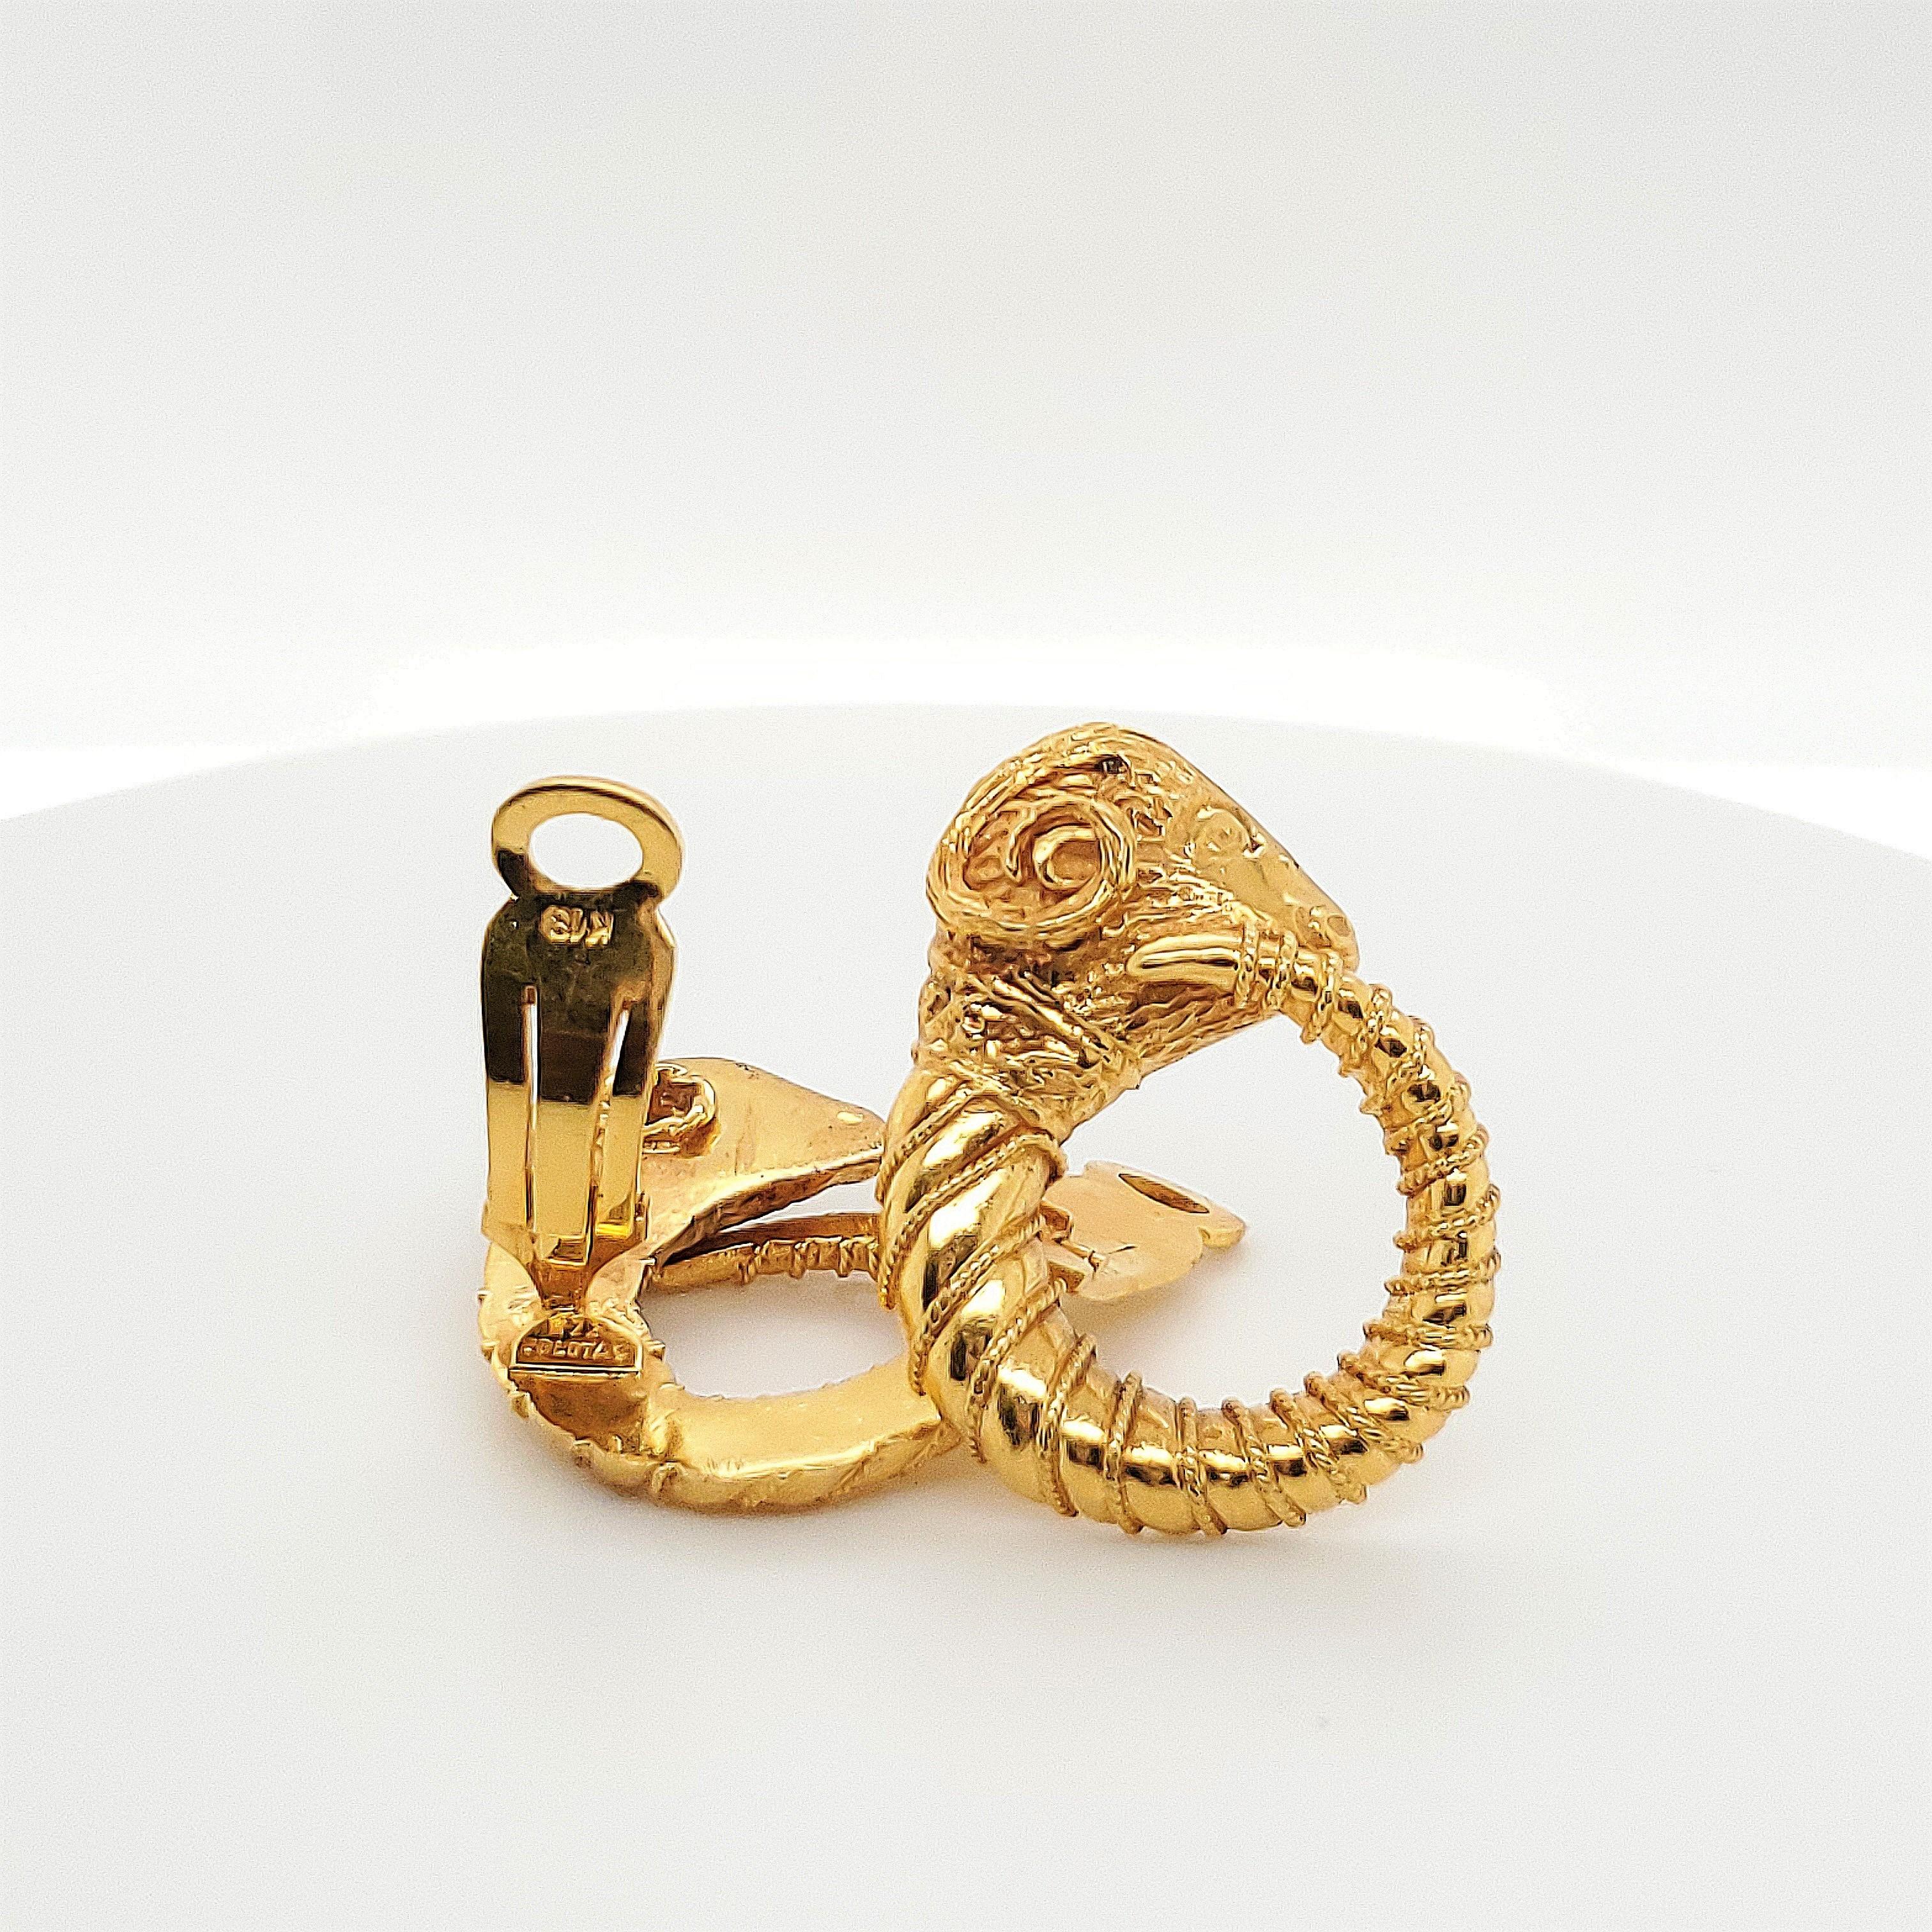 Authentic Zolotas earrings crafted in 18 karat yellow gold.  The Zolotas signature style is evident in the strong design of these exquisite ram earrings.  Featuring a ram's head and tapering to a horn that wraps around to form a hoop shape.  The